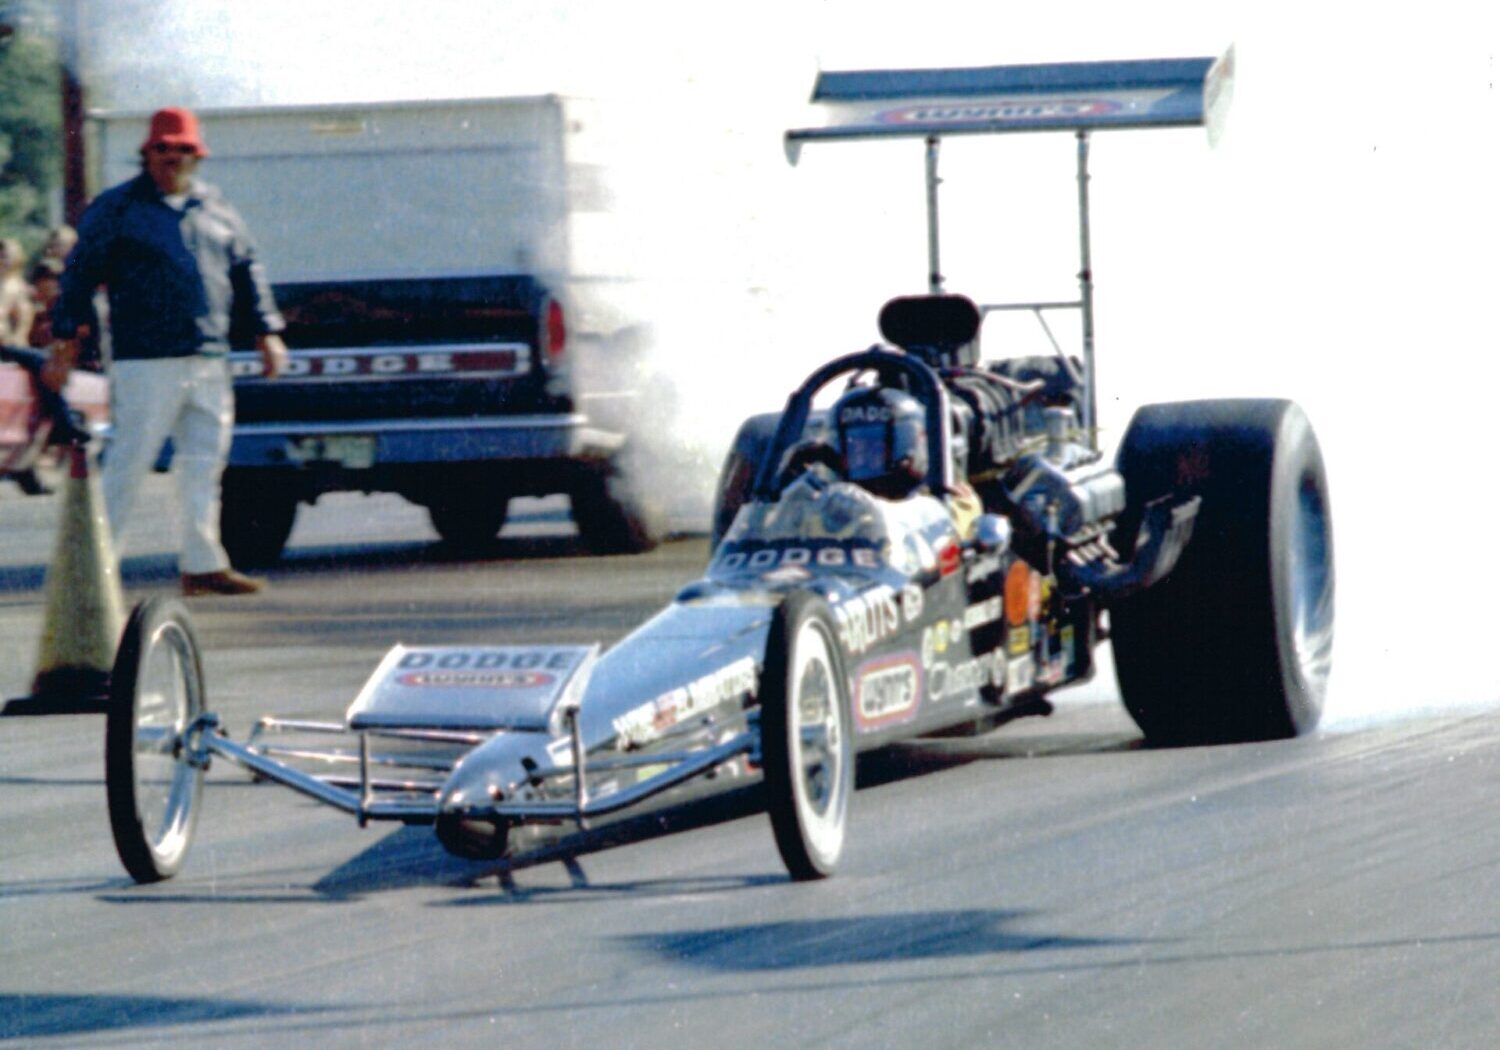 Built in the fall of 1971 by “Big Daddy”, Connie Swingle, and Tommy “TC” Lemons Swamp Rat 16 debuted at the AHRA World Finals in Fremont, California. Swamp Rat 16 won its first outing by beating the team of Warren, Coburn, Miller, and Wiebe.  In 1972 at the NHRA Gatornationals Swamp Rat 16 would set a top speed of 243.24 MPH and 6.05 second ET. It would go on to win the 1972 AHRA World Championship. 